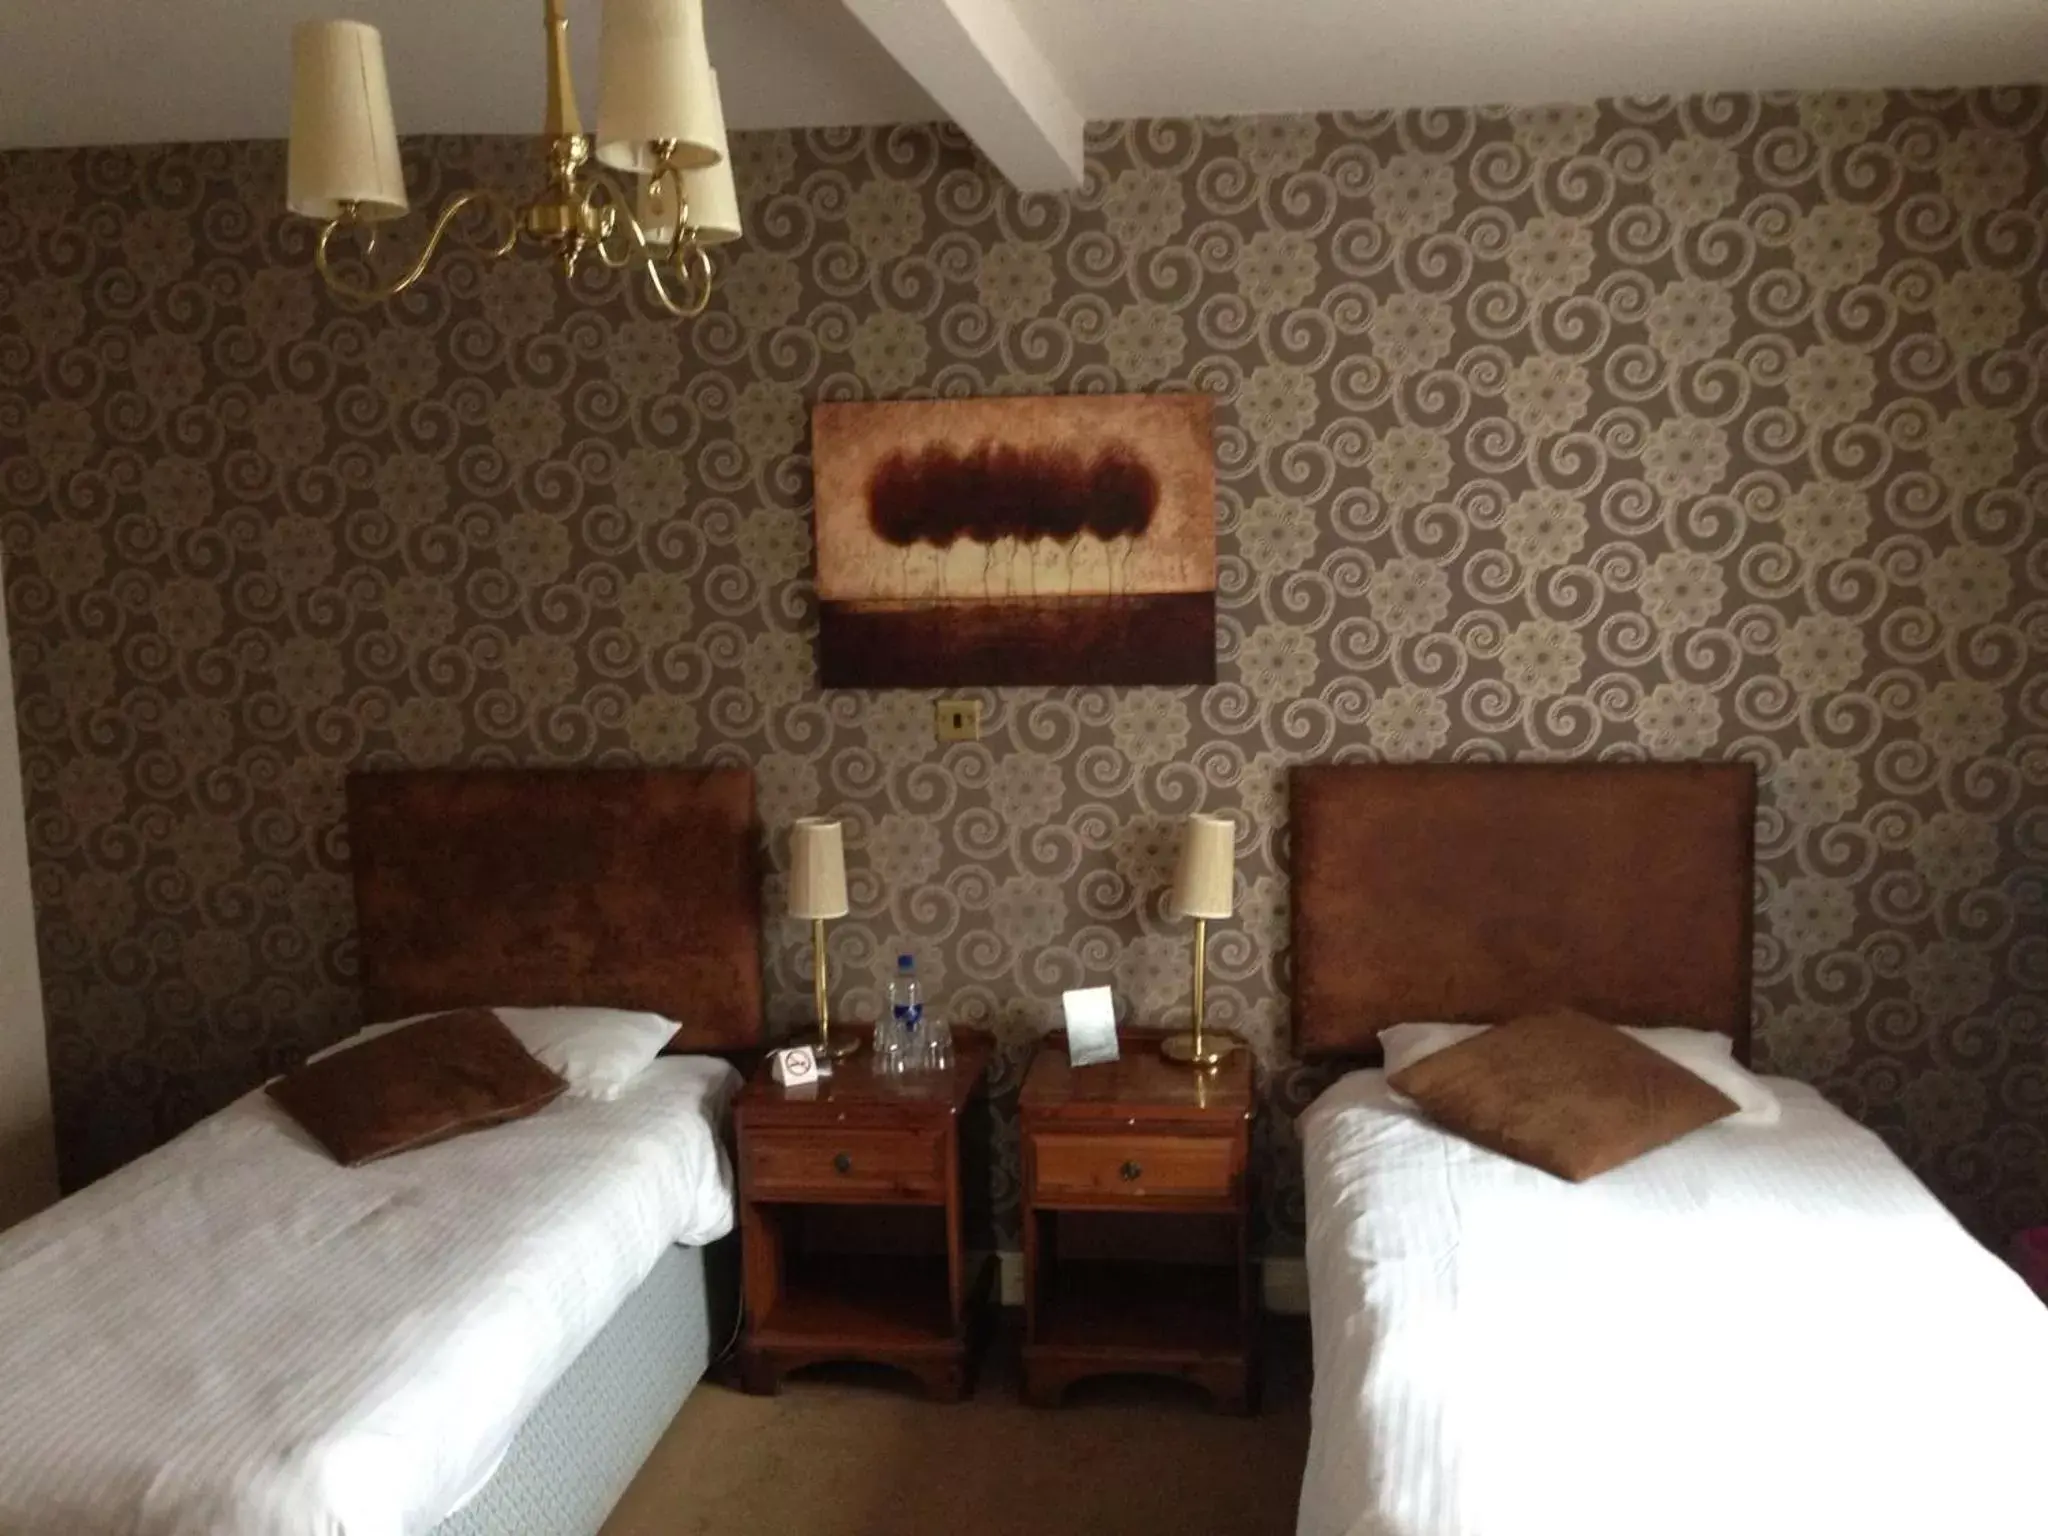 Decorative detail, Bed in The Junction Hotel